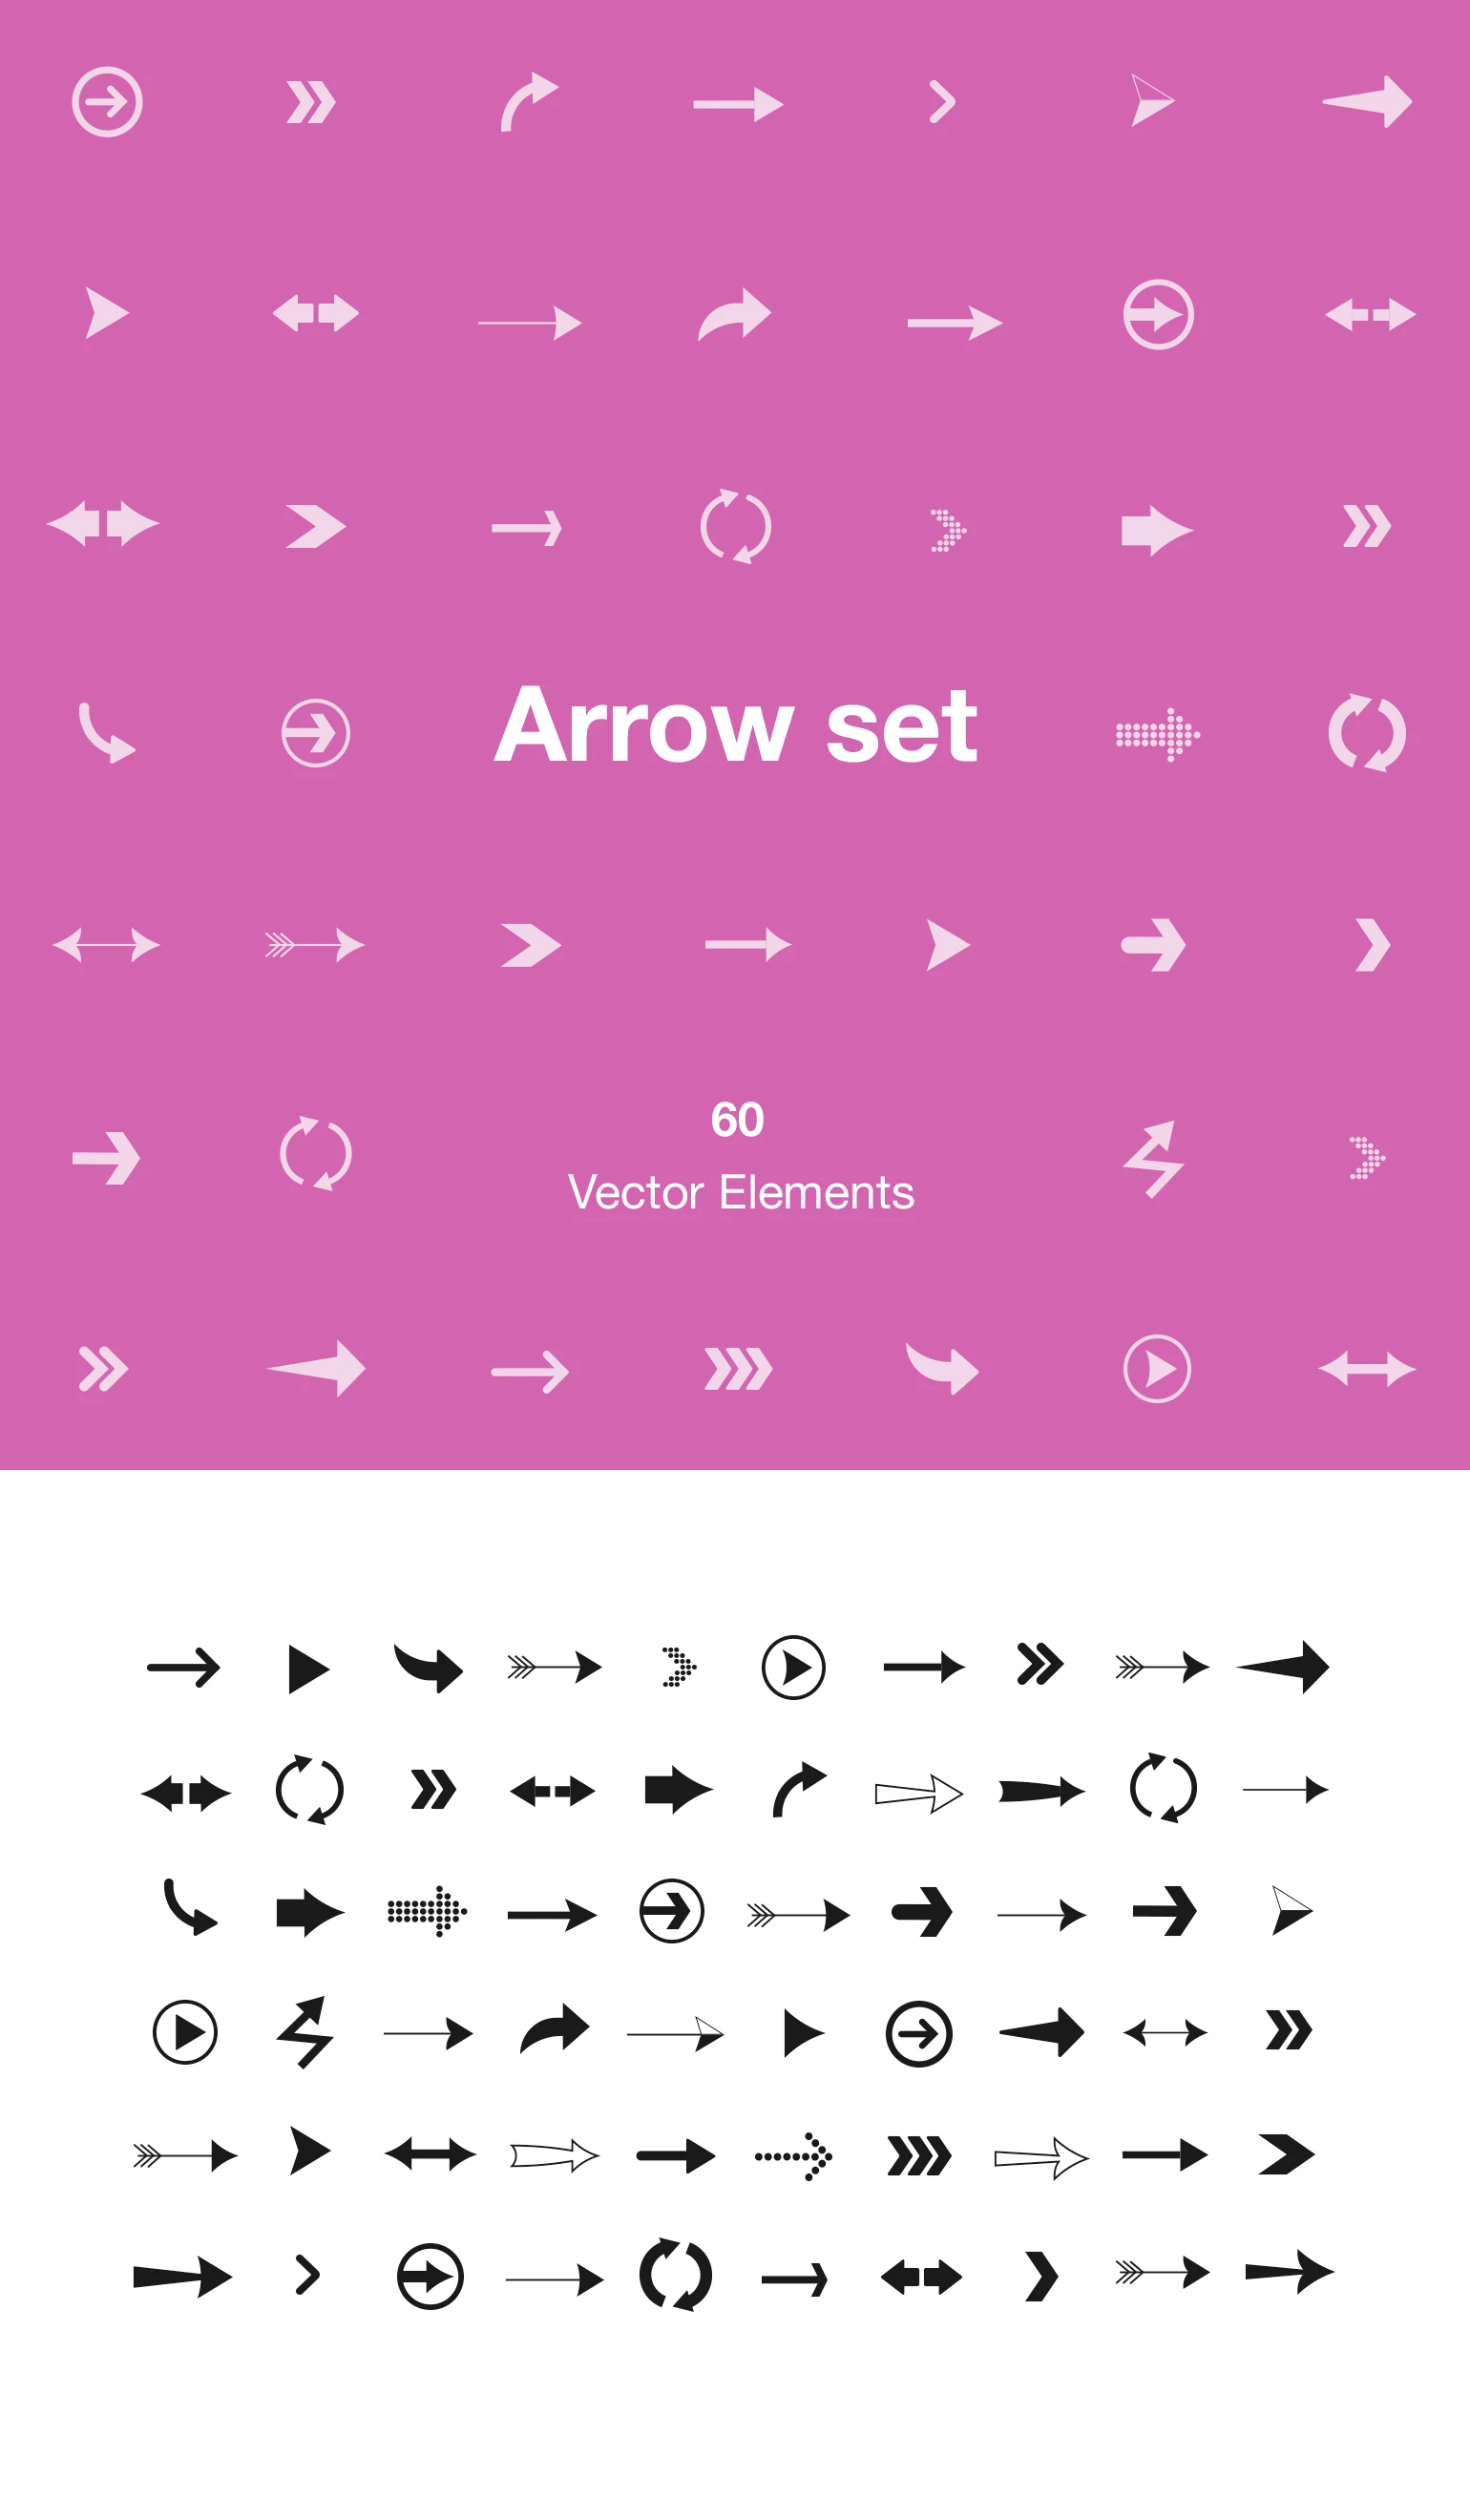 Arrow Set - 60 Vector Elements - This resource contains 60 vector based arrows that can be used by designers and developers. Use the arrows in your mobile app, on your website or in presentations and change the colors to make them fit into your theme. 